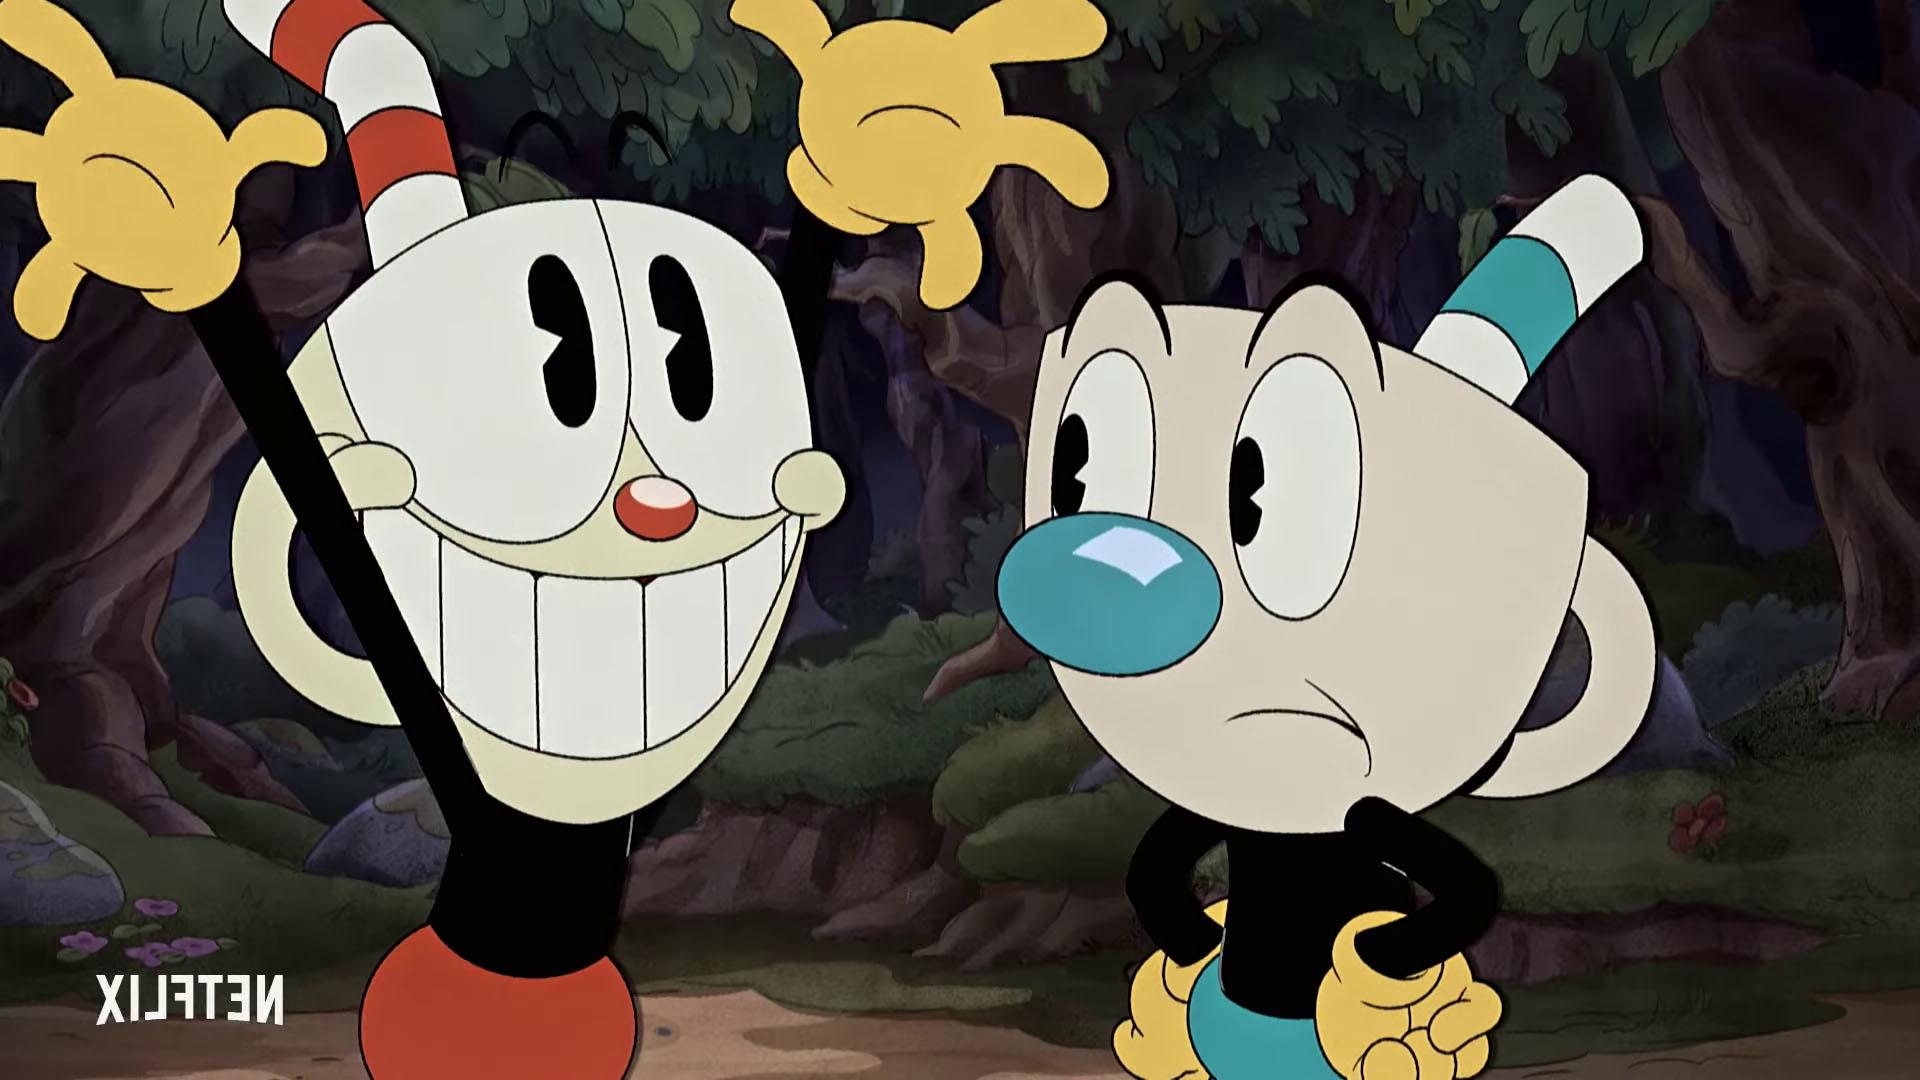 The Cuphead Show! Premieres At The 18th Feb News 24